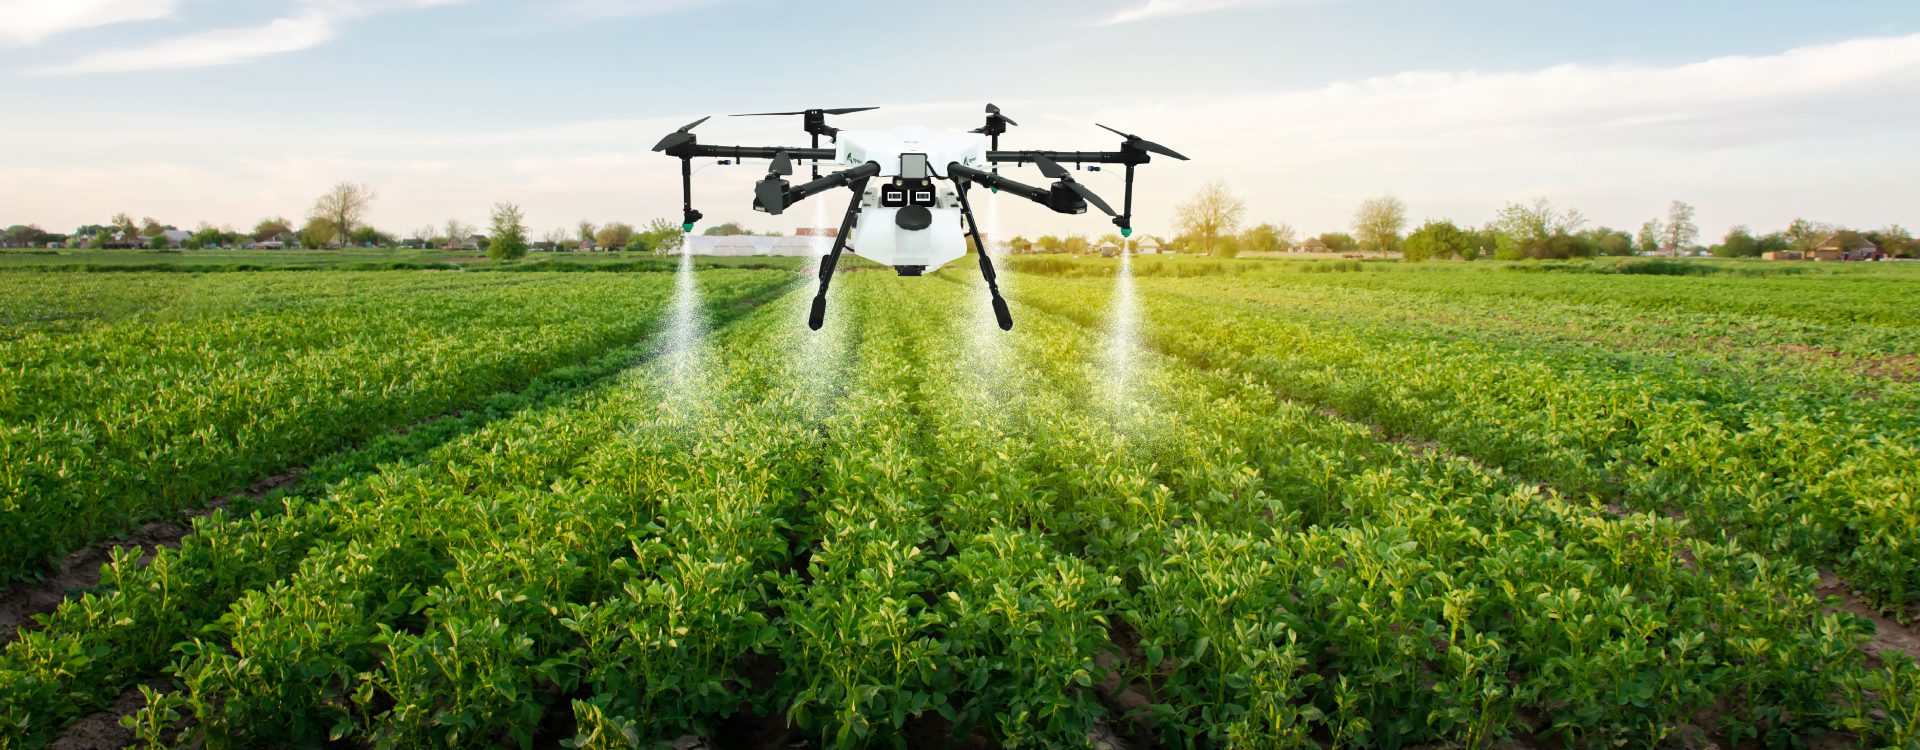 usage of precision agriculture drones in farming